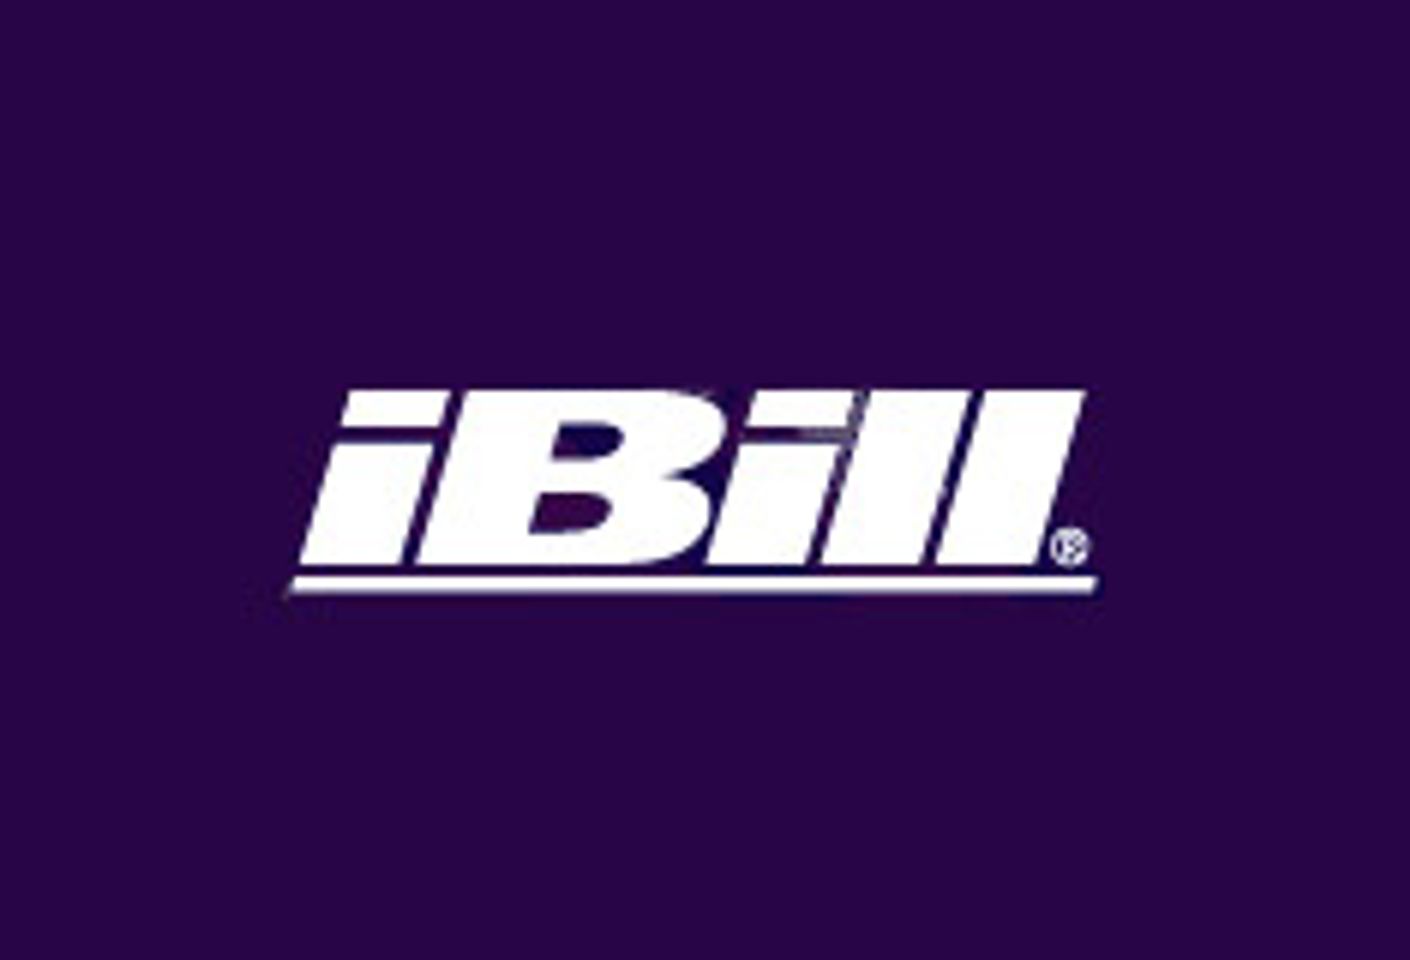 iBill to Outsource Payment Processing